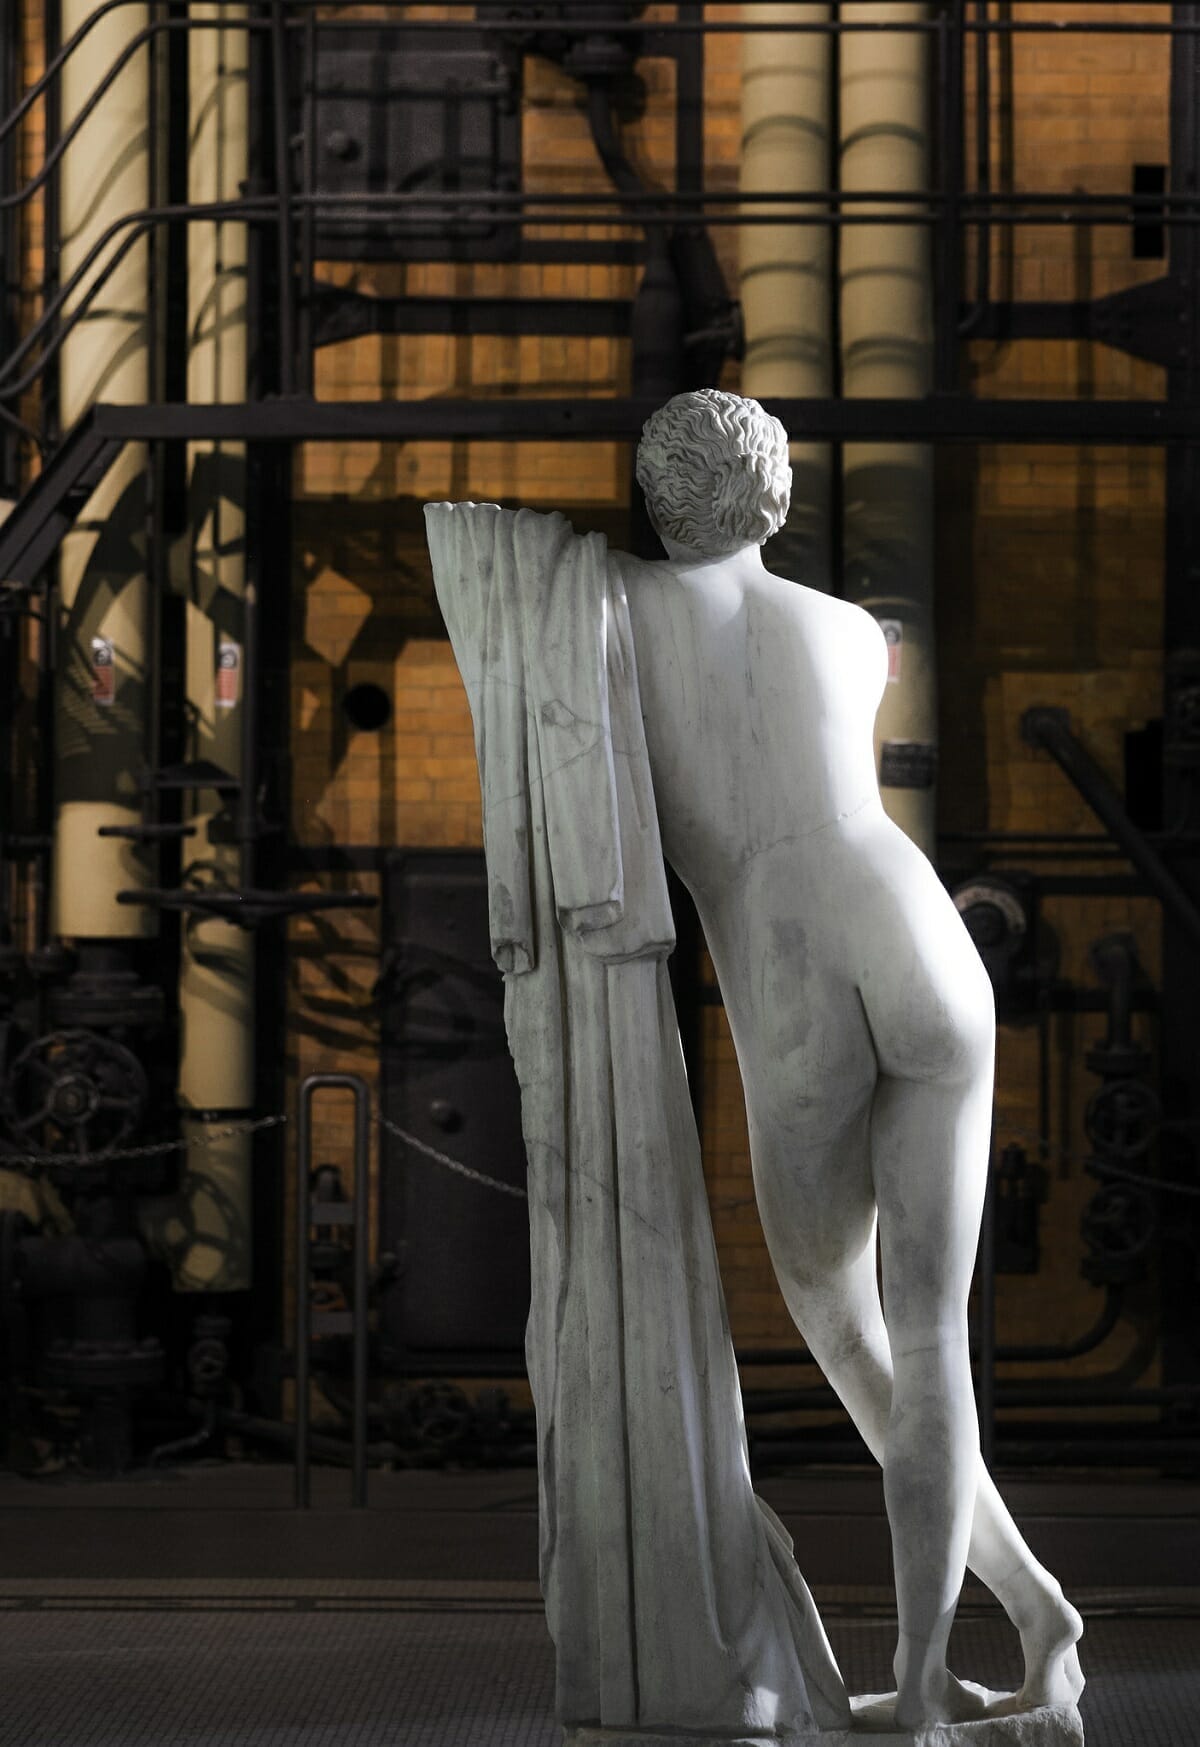 Statue from behind at the Centrale Montemartini museum in Rome.